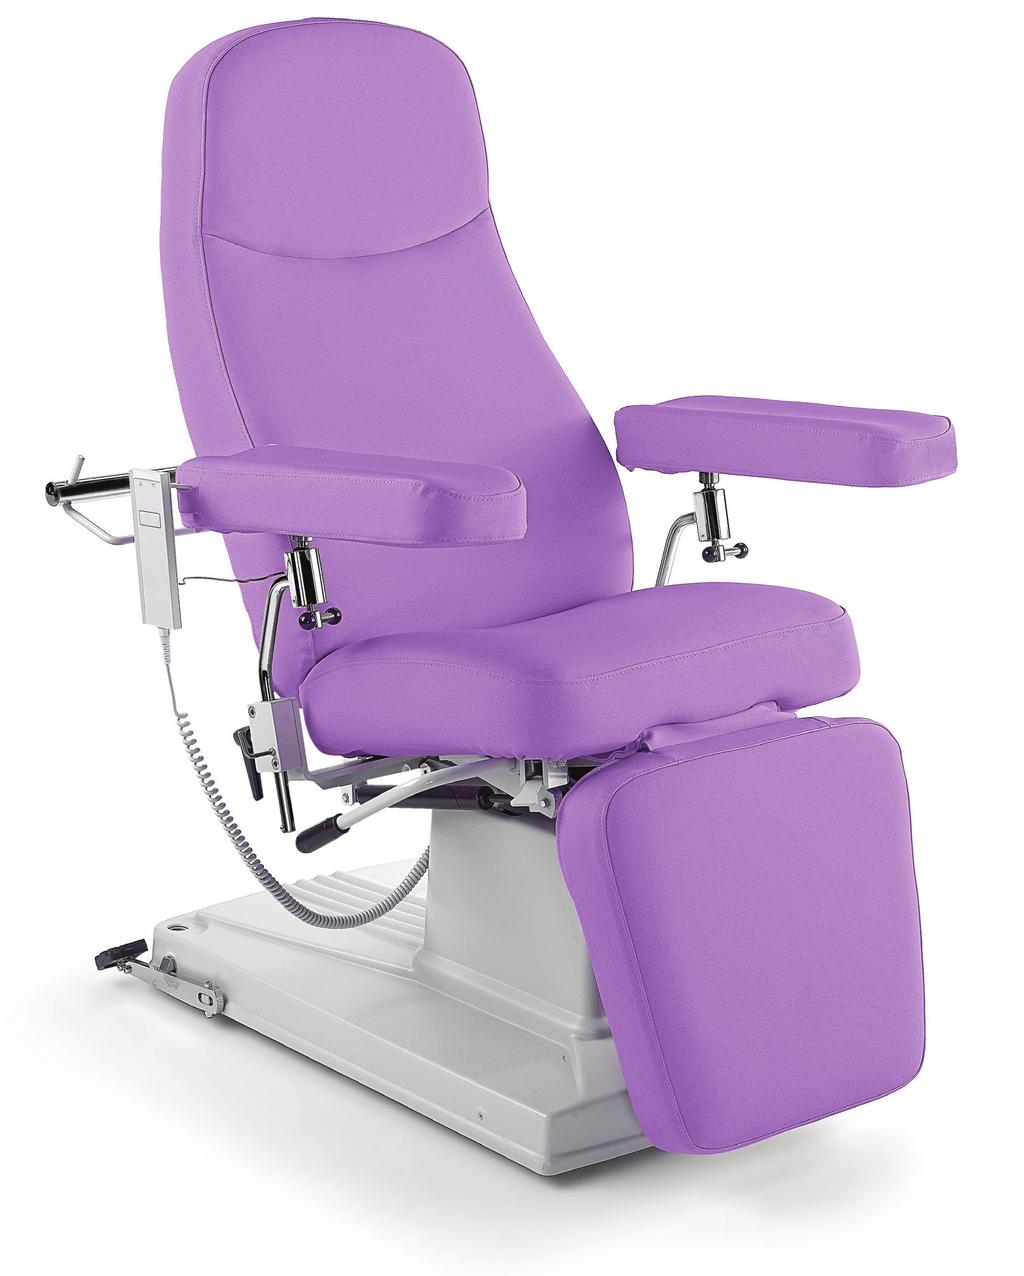 MEDIC Day Clinic Procedures Chair 130Kg The Day Clinic Procedures Chair features electric height and trendelenburg tilt operation with hand switch control.